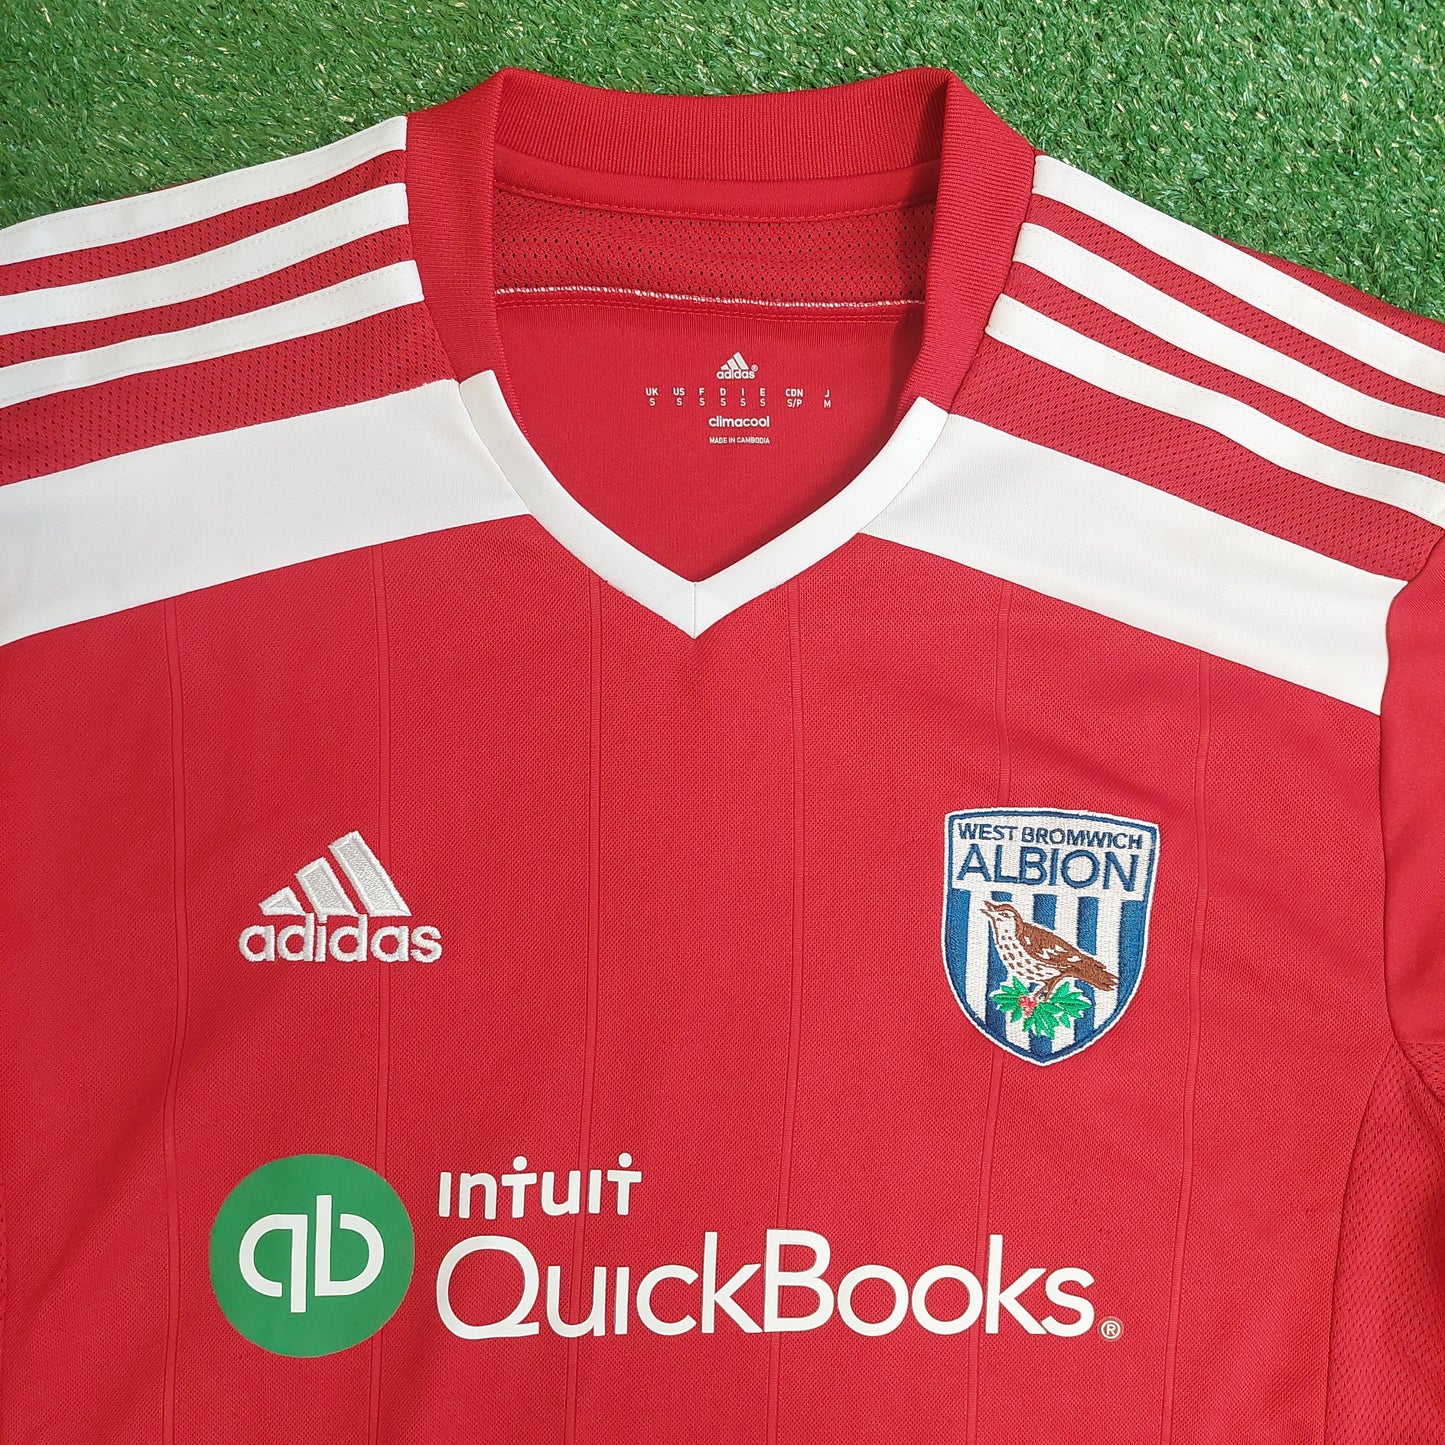 West Bromwich Albion 2014/15 Away Shirt (Very Good) - Size S